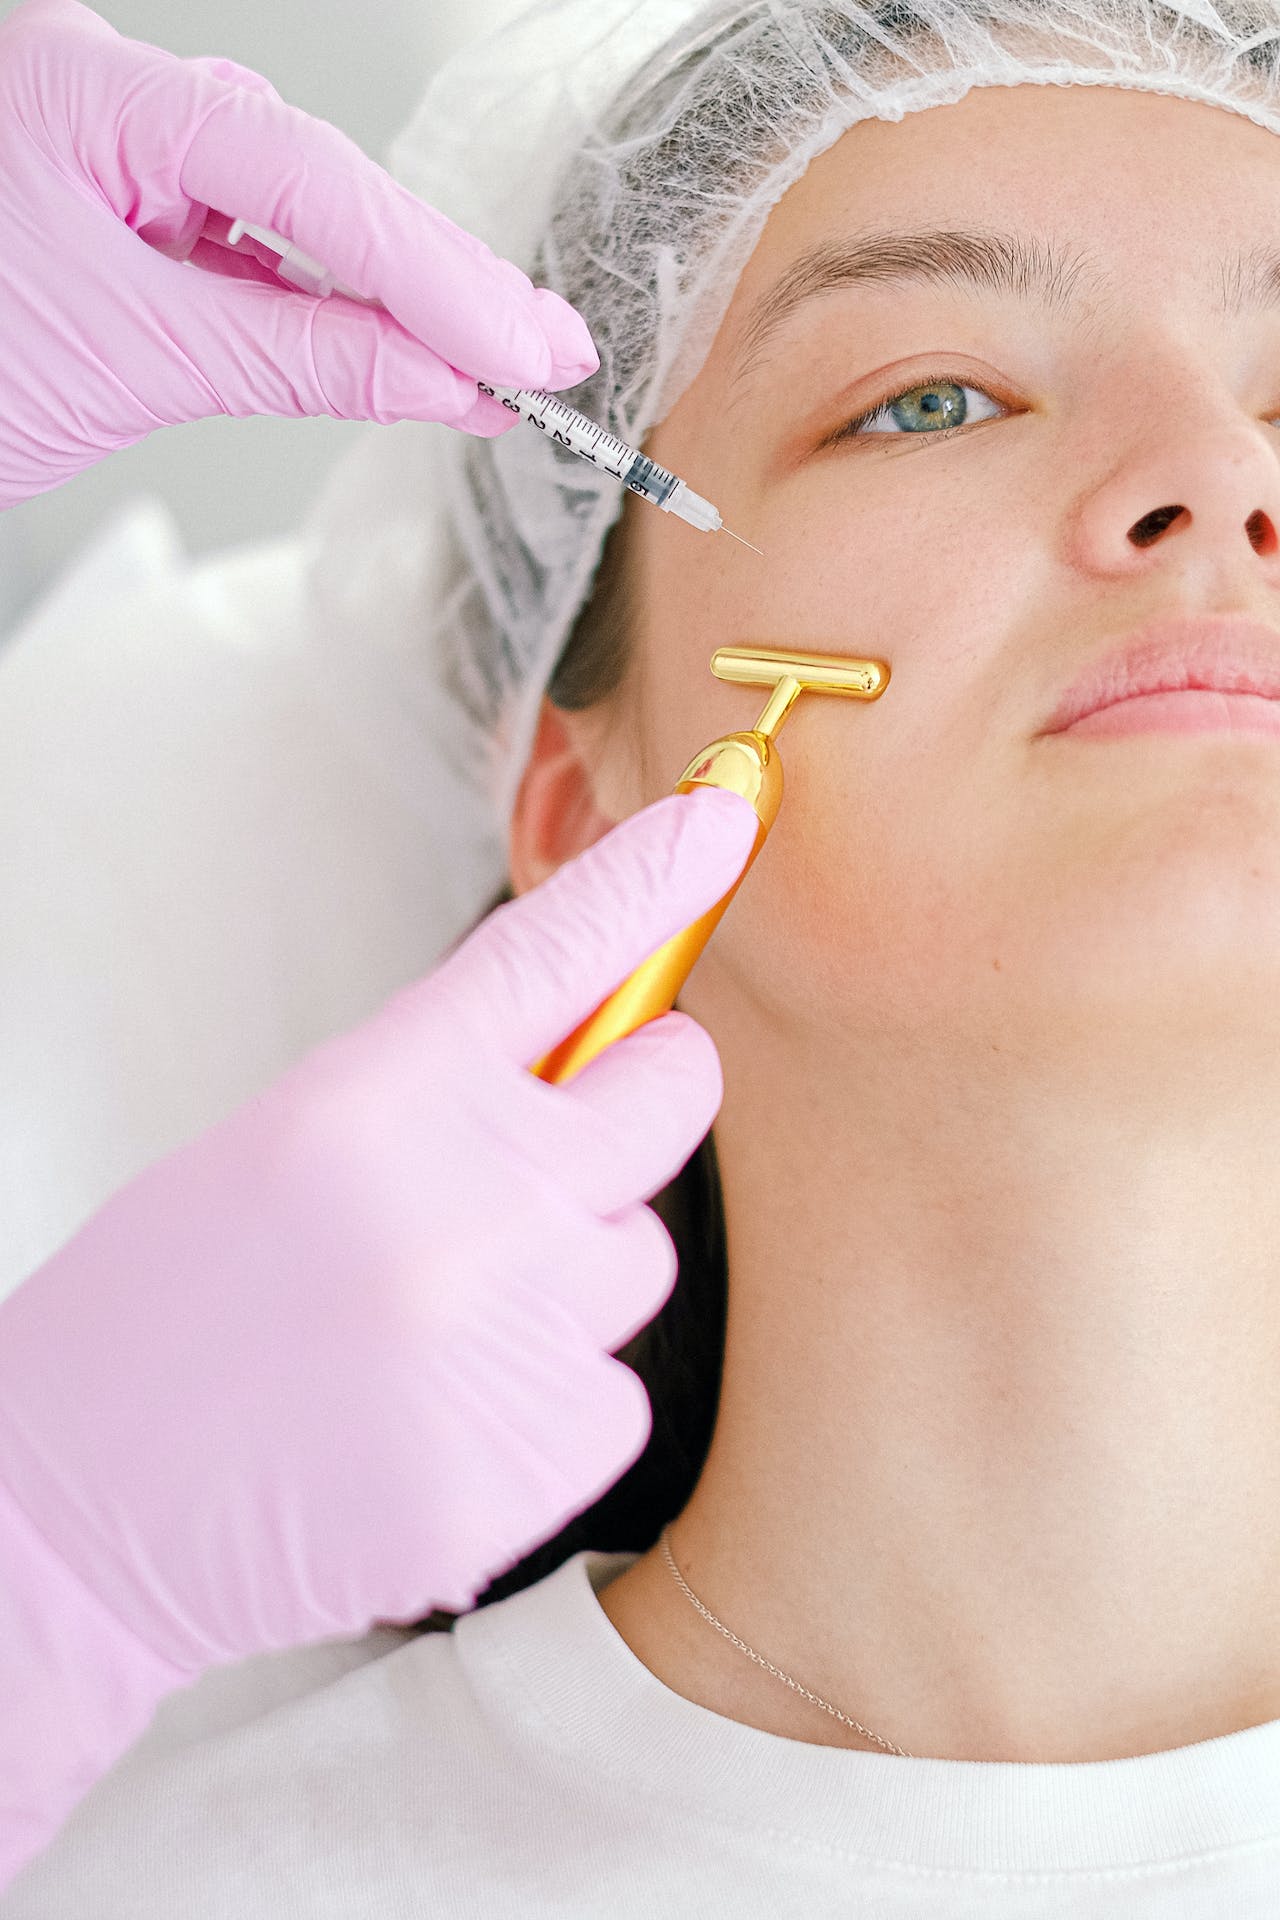 Rejuvenate your face with these trending beauty treatments face fillers